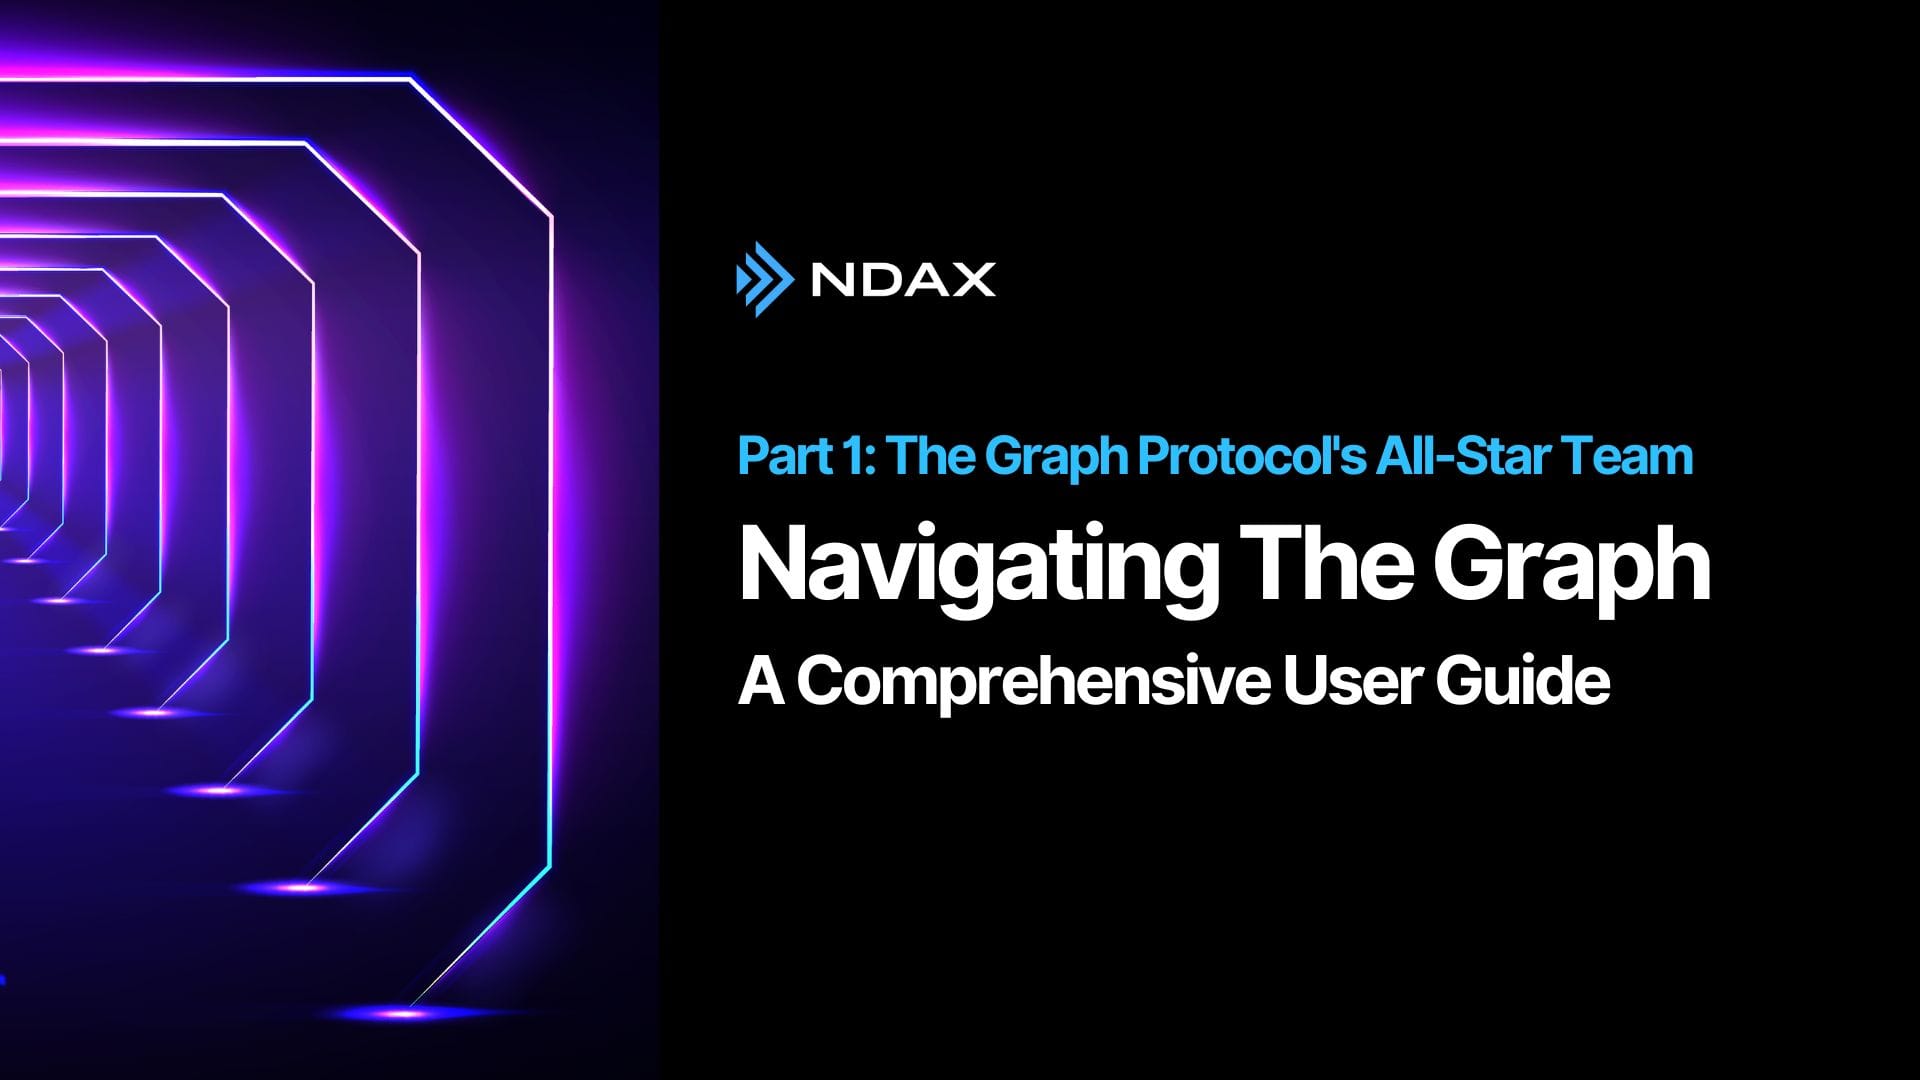 Navigating The Graph: A Comprehensive User Guide - Part 1